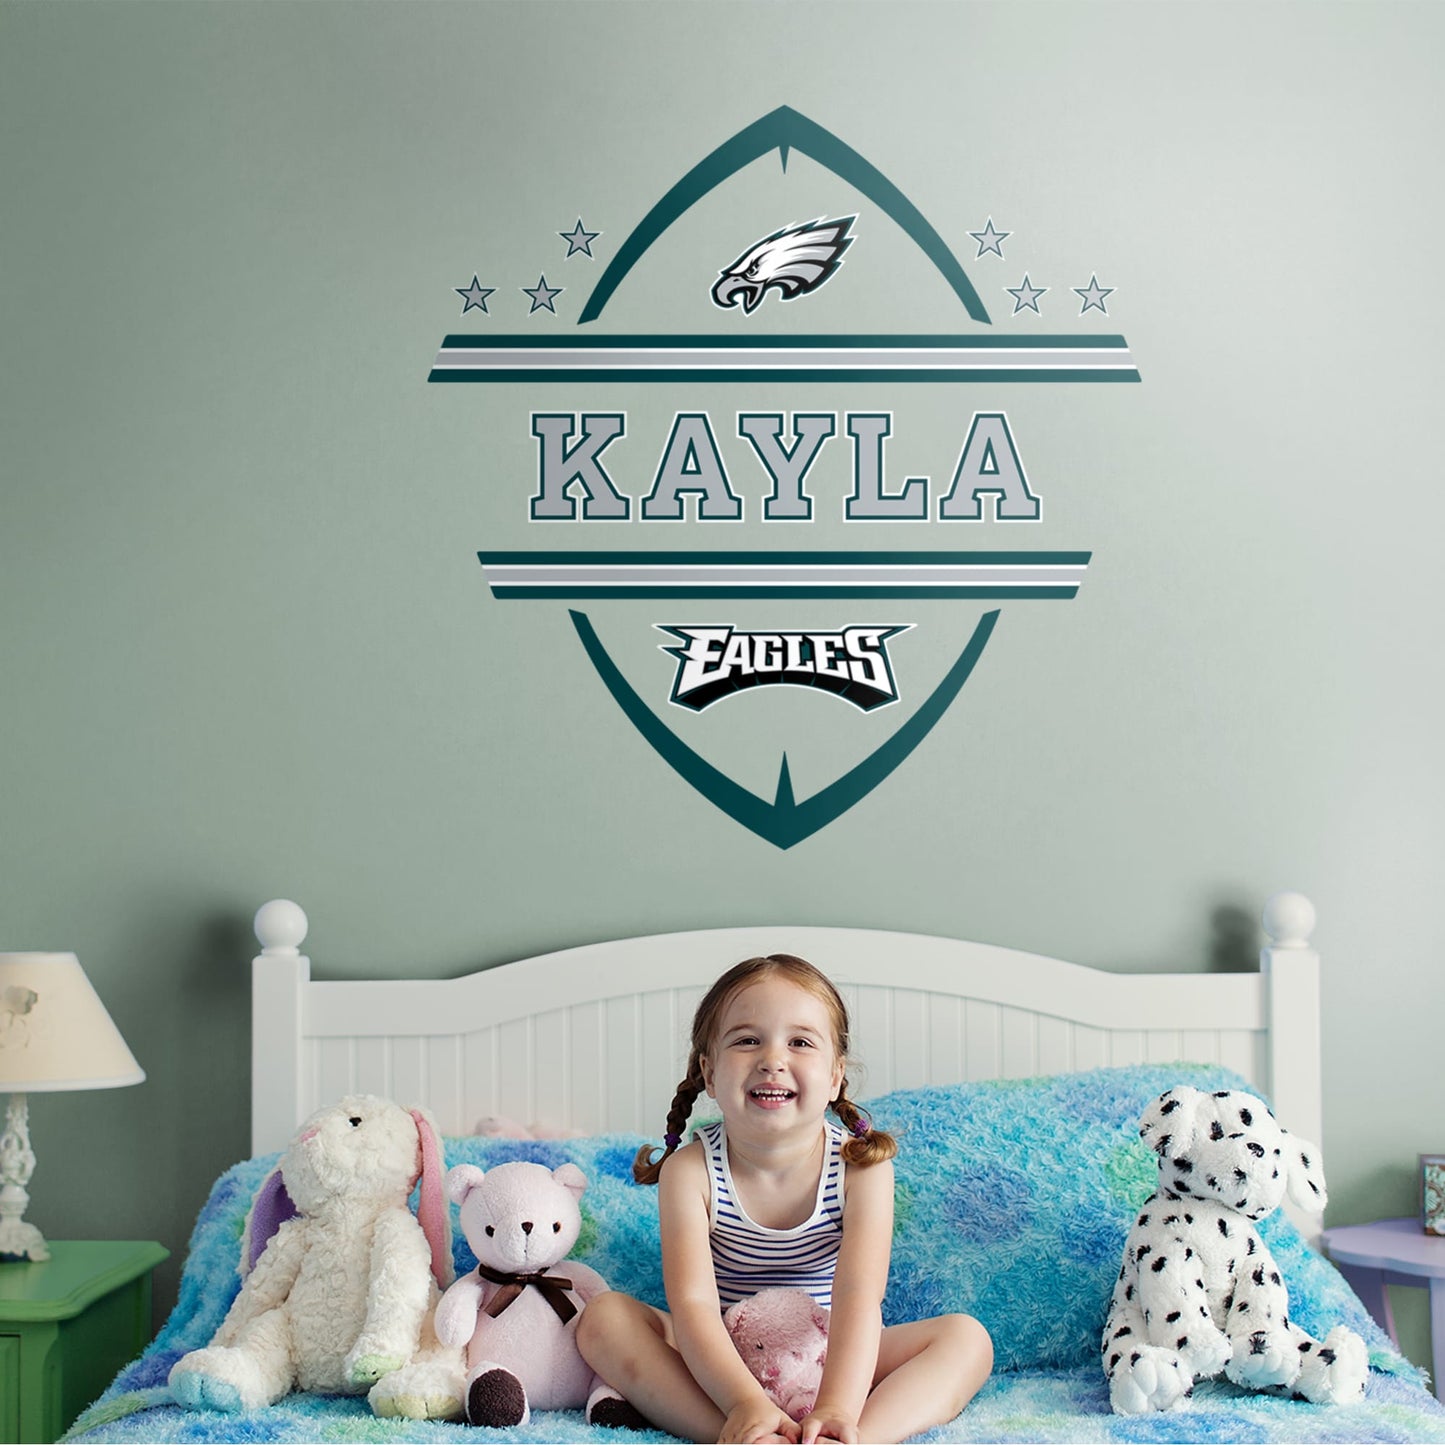 Philadelphia Eagles: Personalized Name - Officially Licensed NFL Transfer Decal